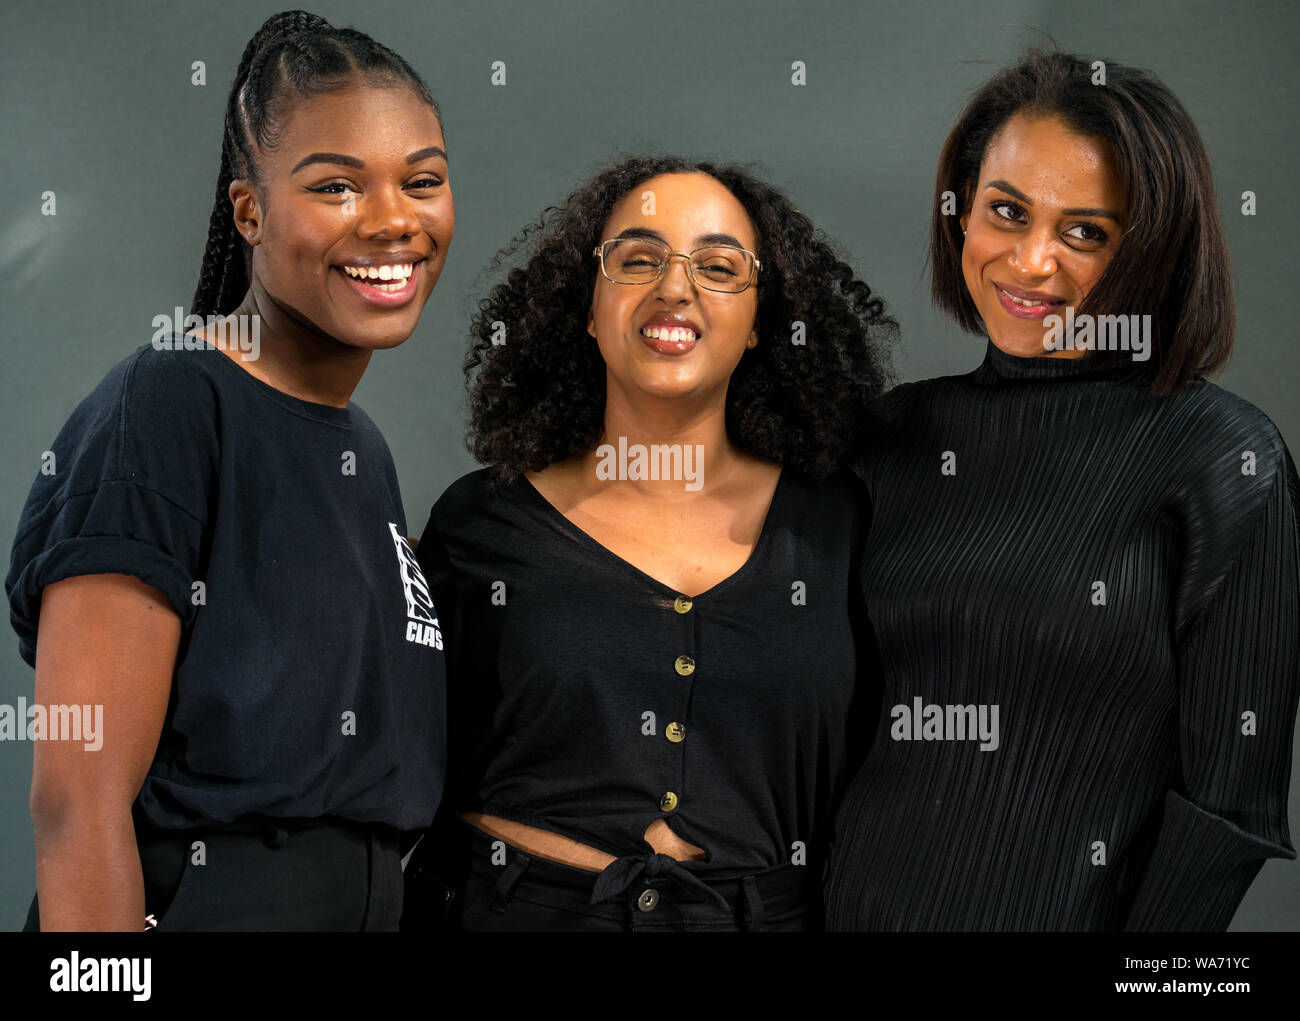 Edinburgh, Scotland, UK, 18 August 2019. Edinburgh International Book Festival. Pictured: L to R Tania Nwachukwu (British-born Nigerian), Hibaq Osman (London-born Somali writer) & Rachel Long in a showcase of the Octavia Poetry Collection, for women of colour founded by Rachel Long in response to their lack of representation in literature Stock Photo